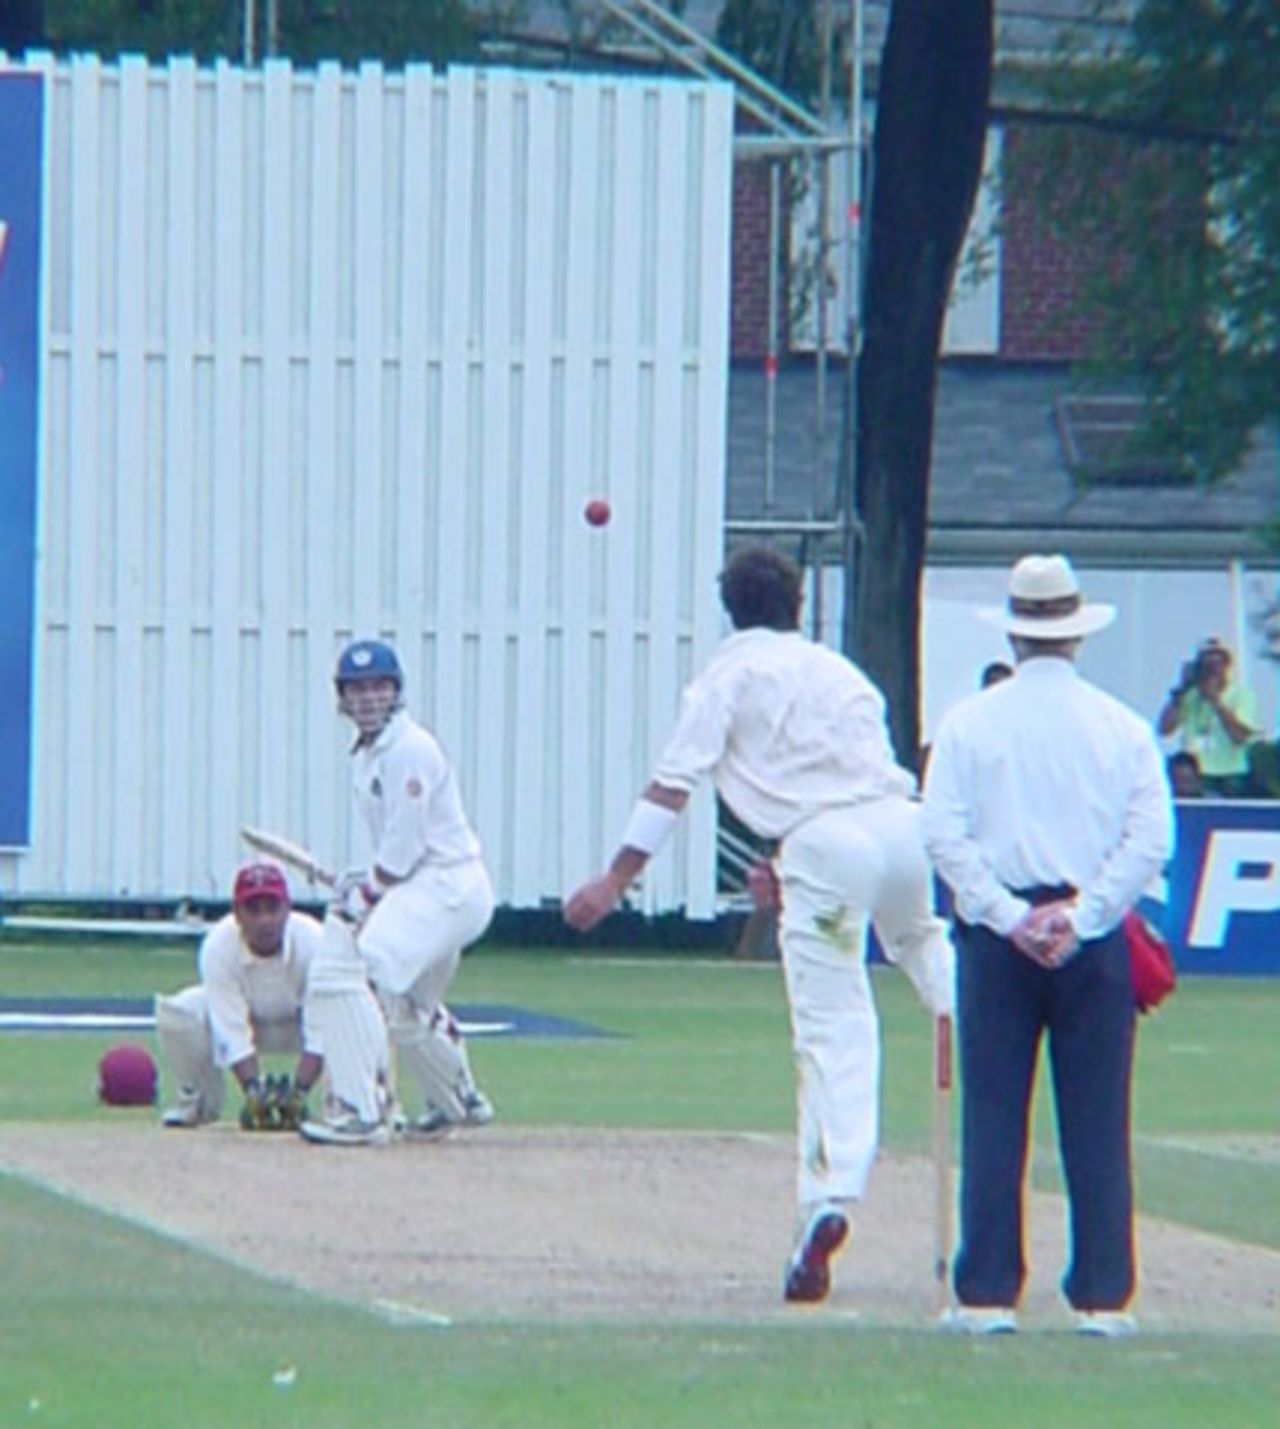 Canadian off spinner John Davison flights up a delivery to Scottish batsman George Salmond. Wicket-keeper Ashish Bagai and South African umpire Rudi Koertzen look on. ICC Trophy 2001: Canada v Scotland, Toronto Cricket, Skating and Curling Club, 17 July 2001.